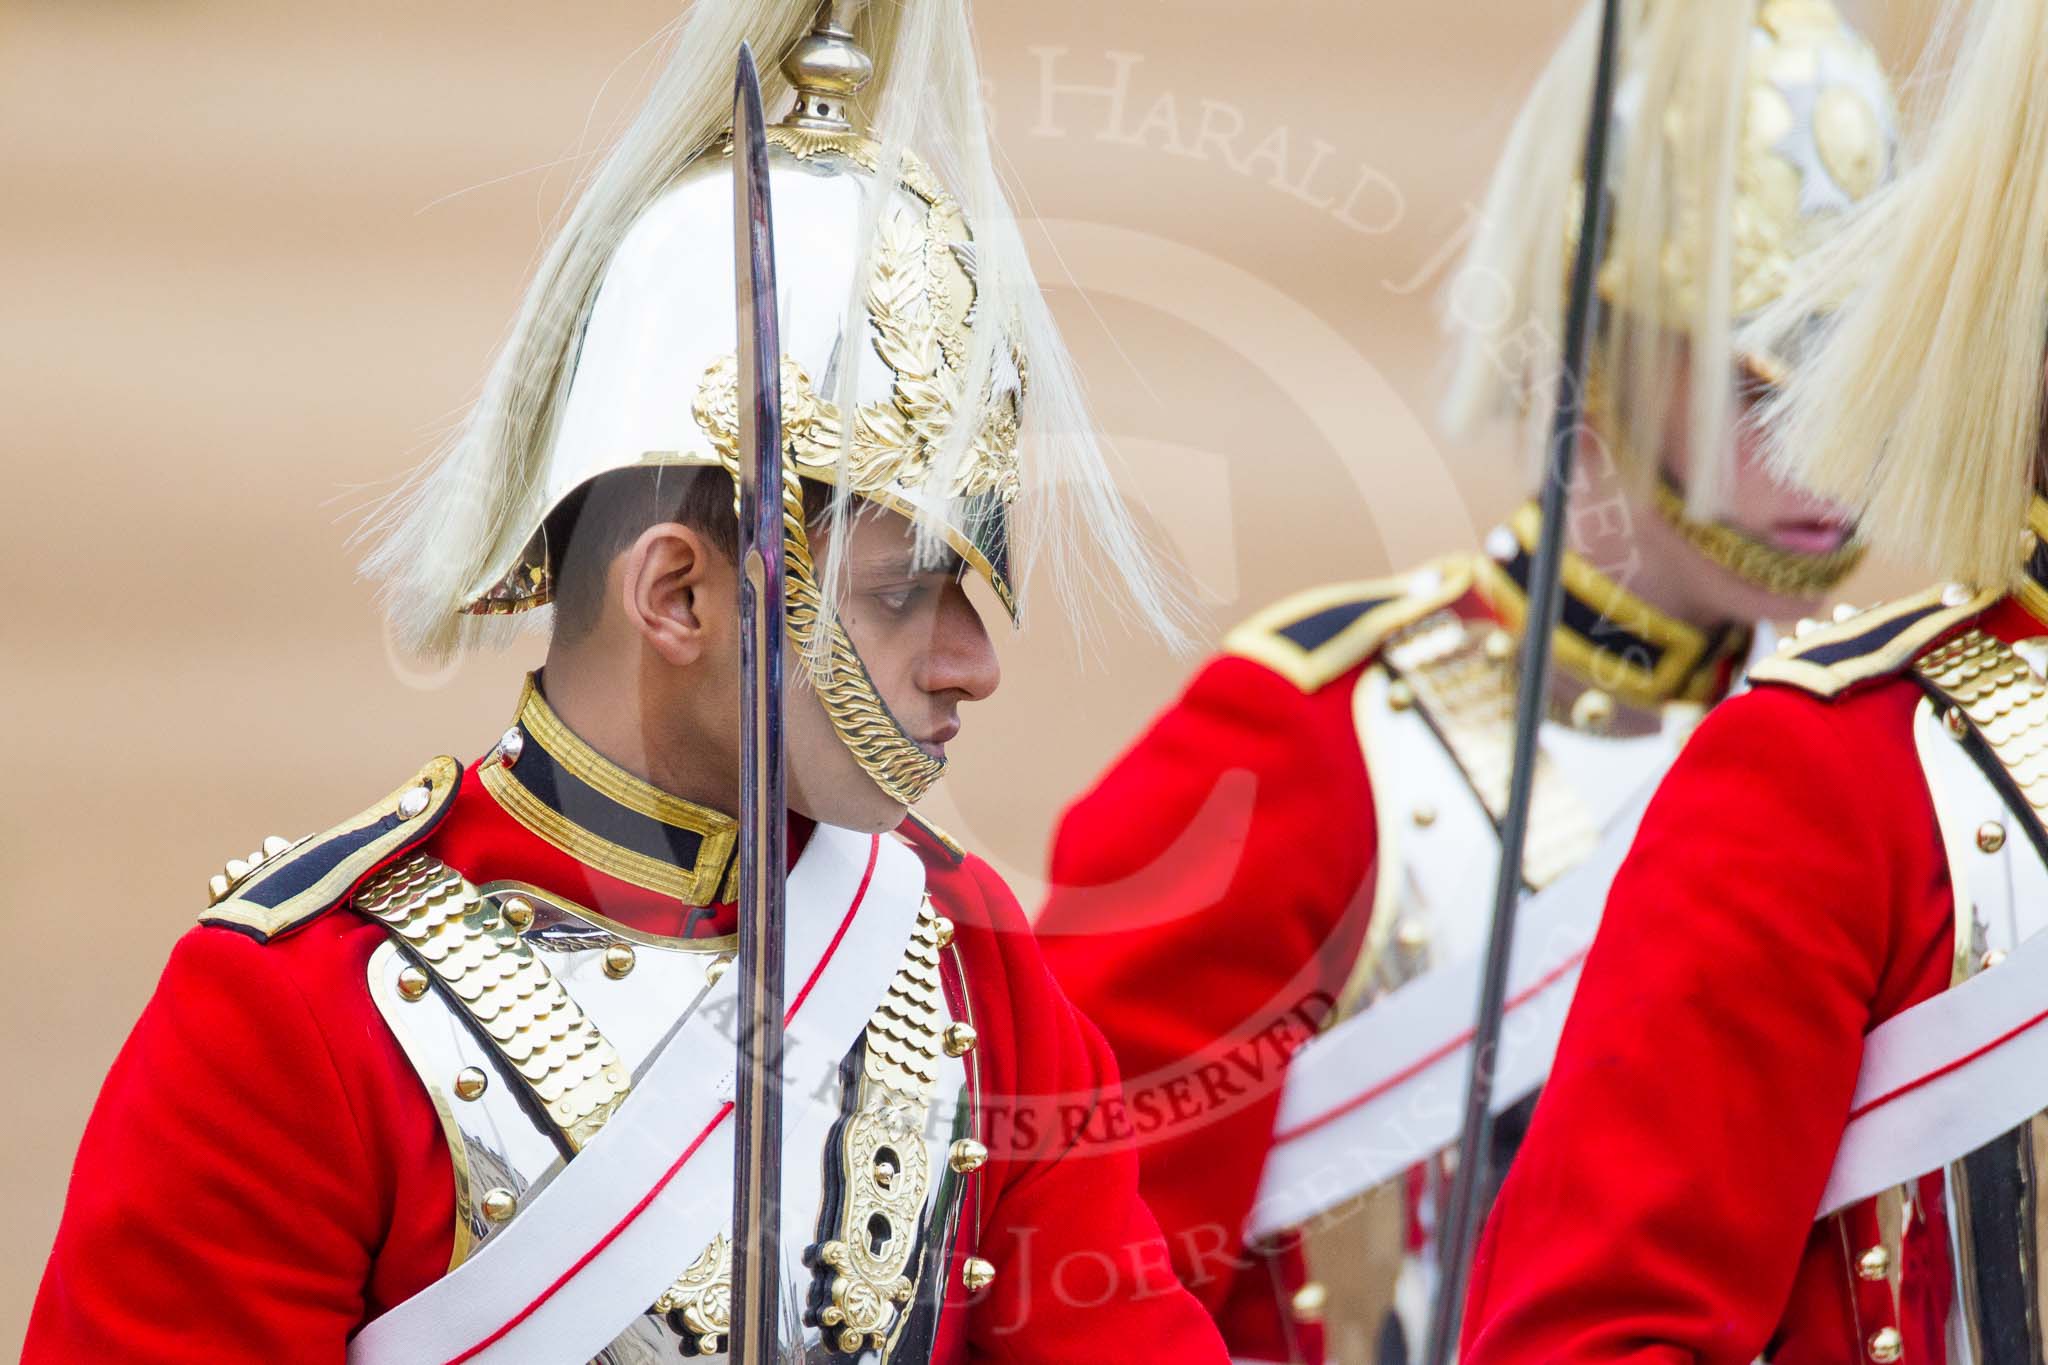 Trooping the Colour 2015. Image #235, 13 June 2015 10:58 Horse Guards Parade, London, UK